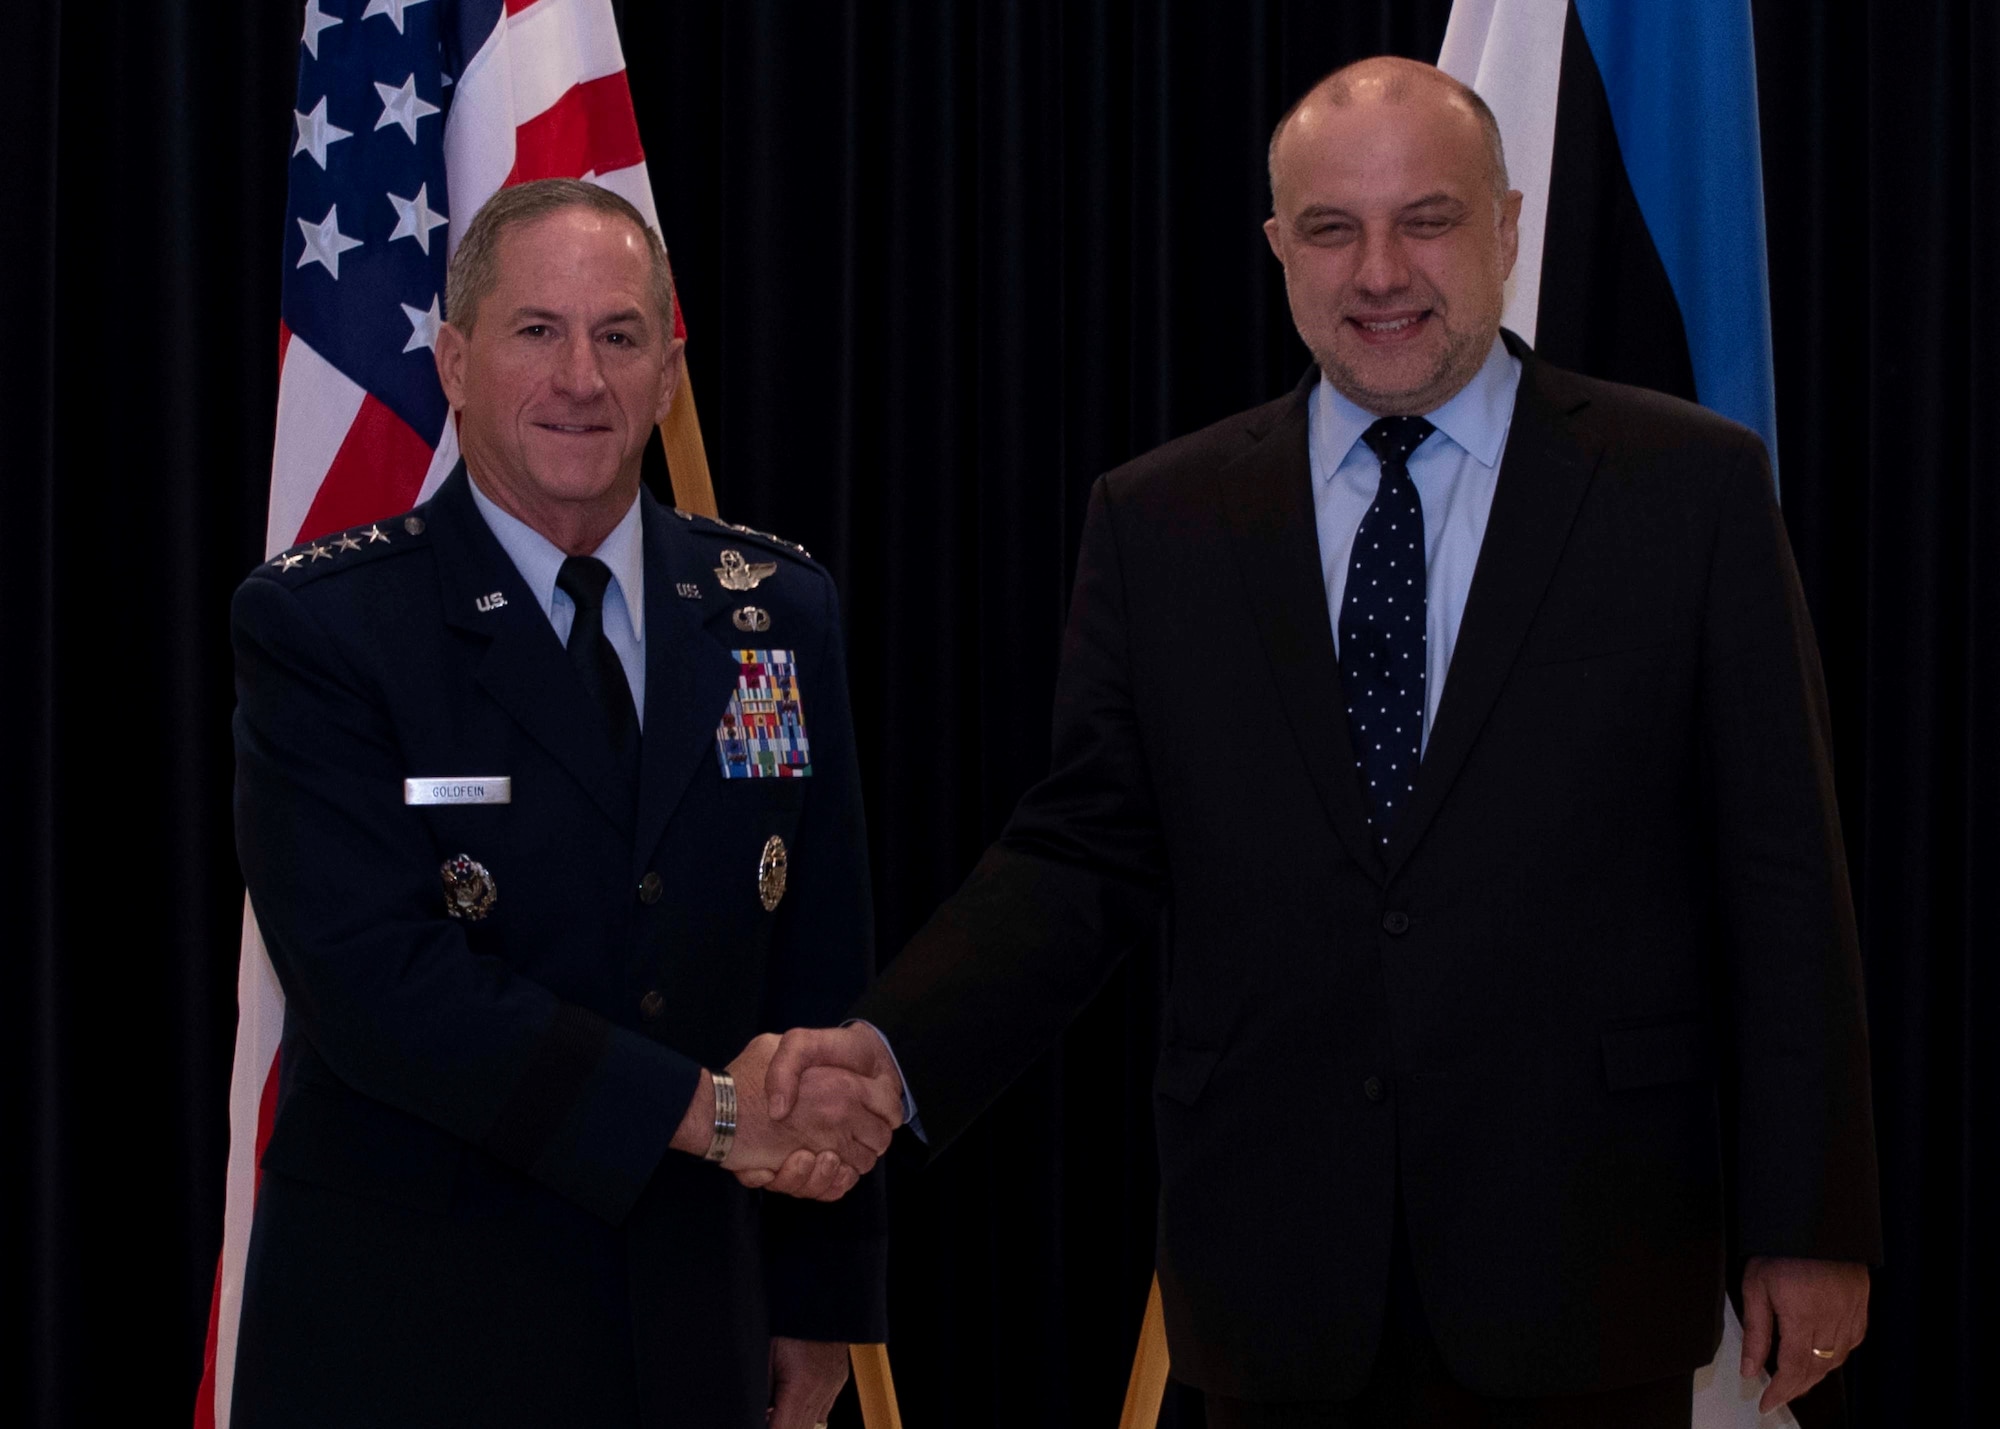 U.S. Air Force Chief of Staff Gen. David L. Goldfein met with Jüri Luik, Estonian Minister of Defence, during his visit to Estonia to discuss Baltic Sea regional security, defence cooperation and international security situation. (Courtesy photos by Estonia Ministry of Defence)